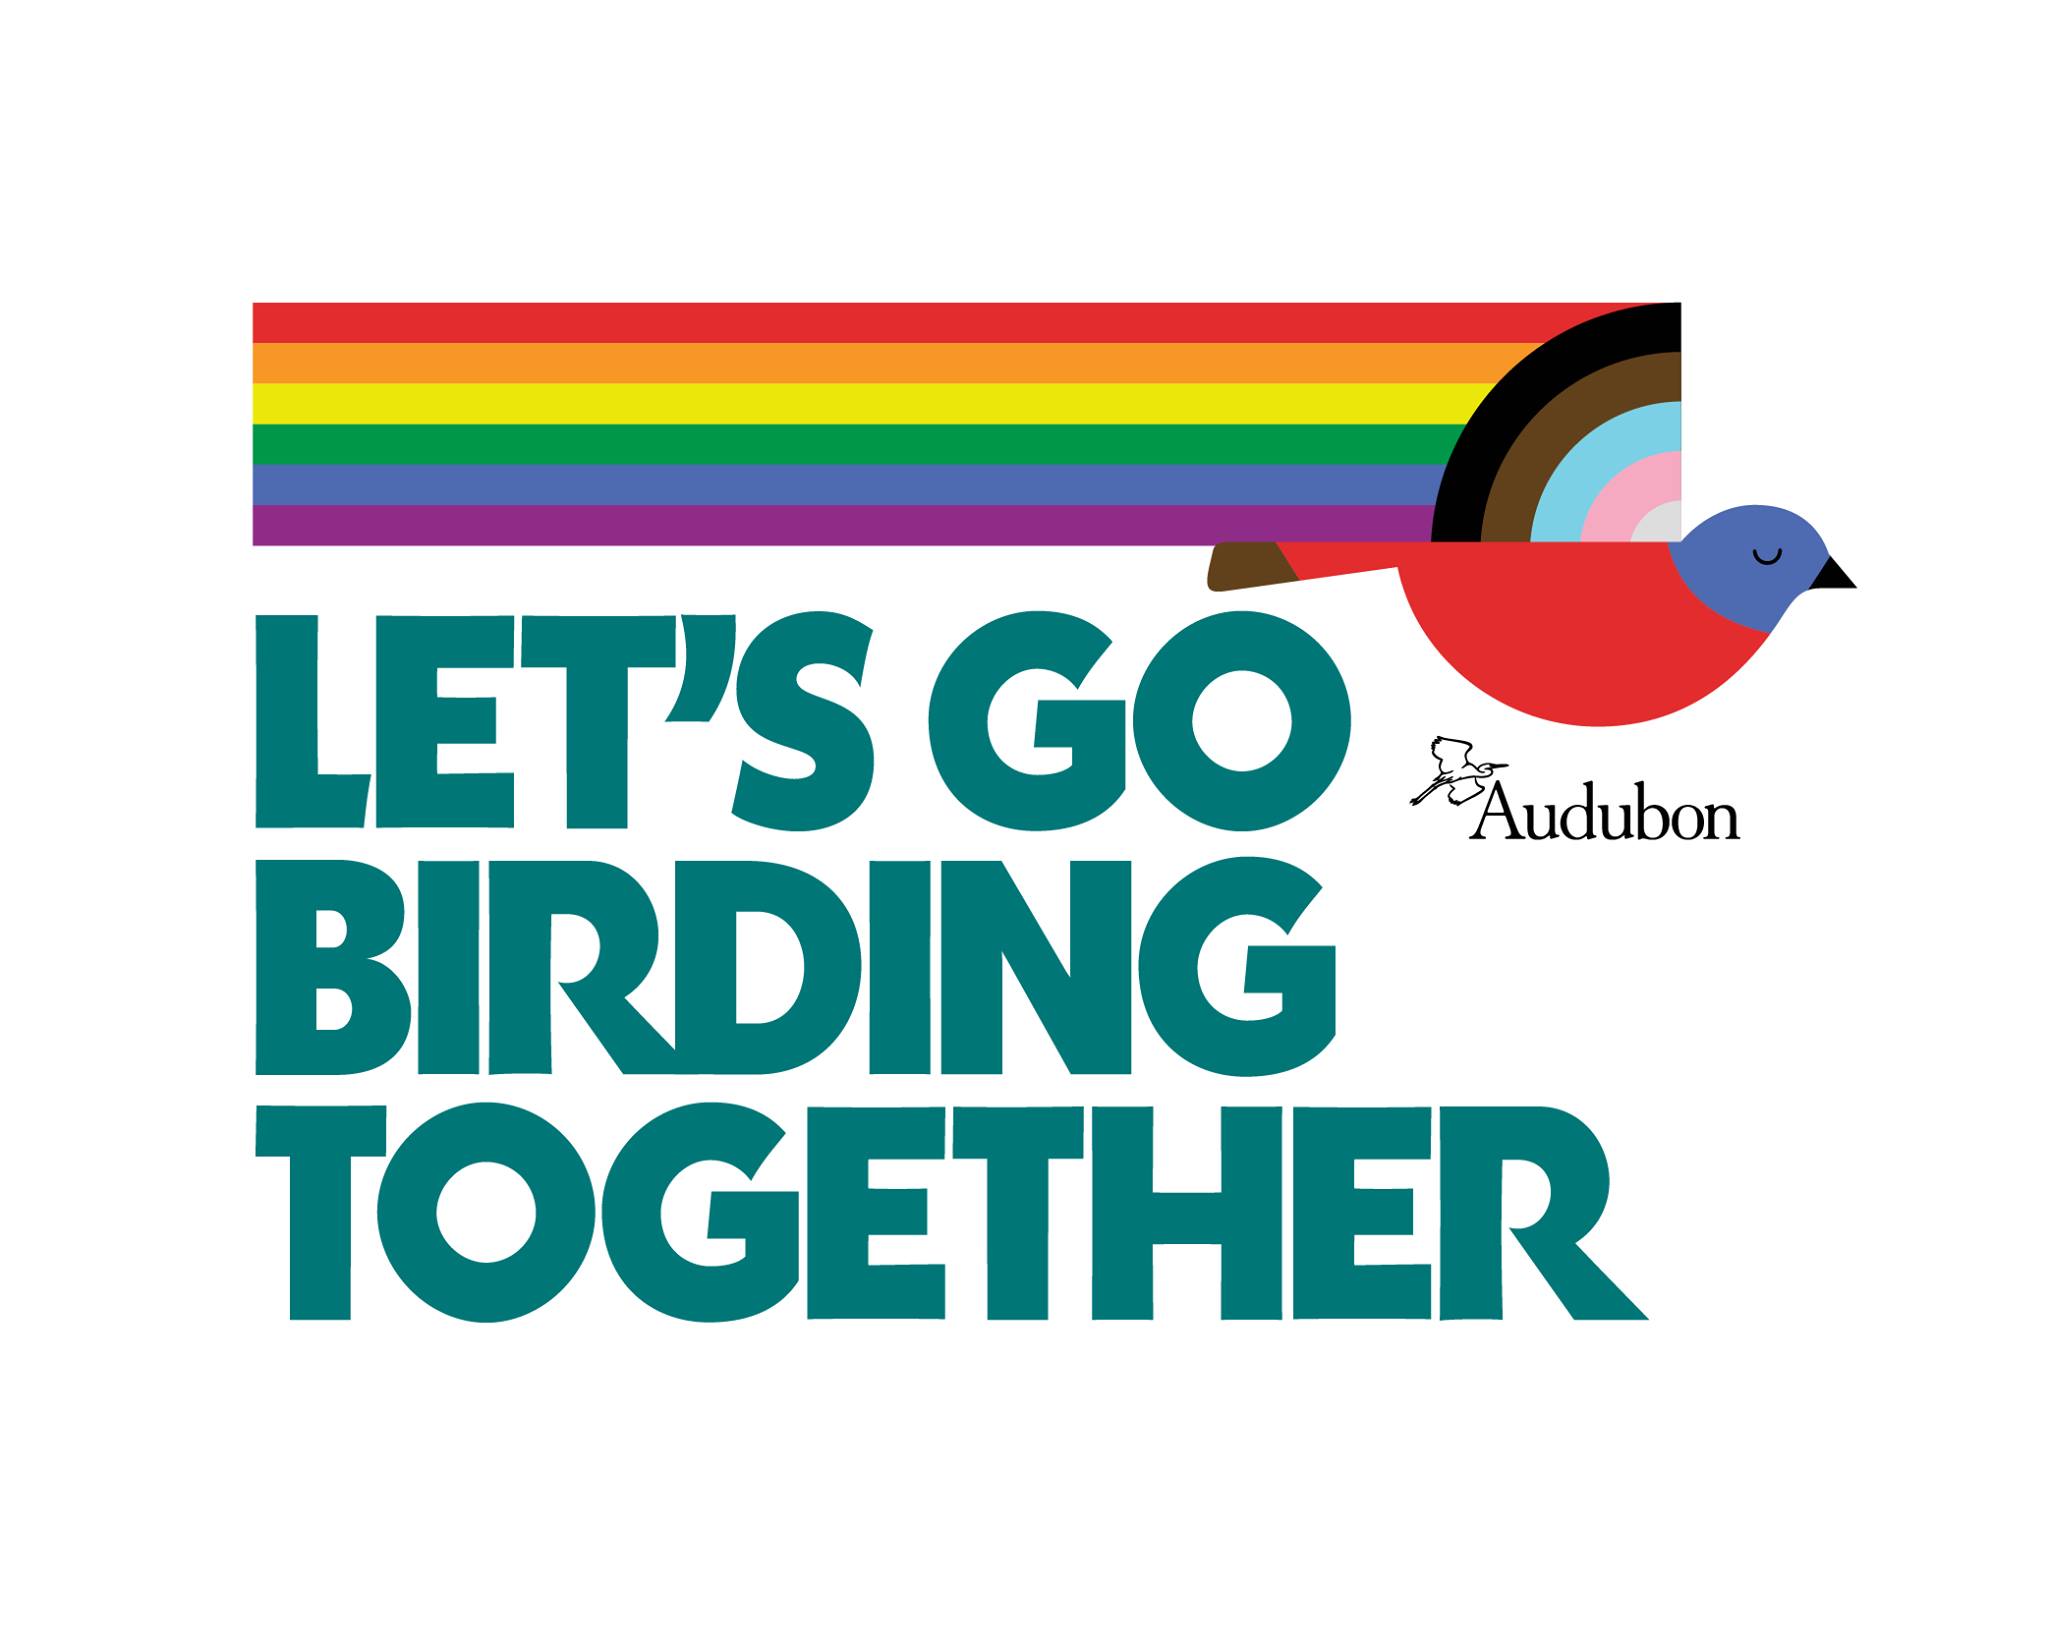 Rainbow banner across the top with a bird; Bold Green/blue letters say "Let's Go Birding Together"